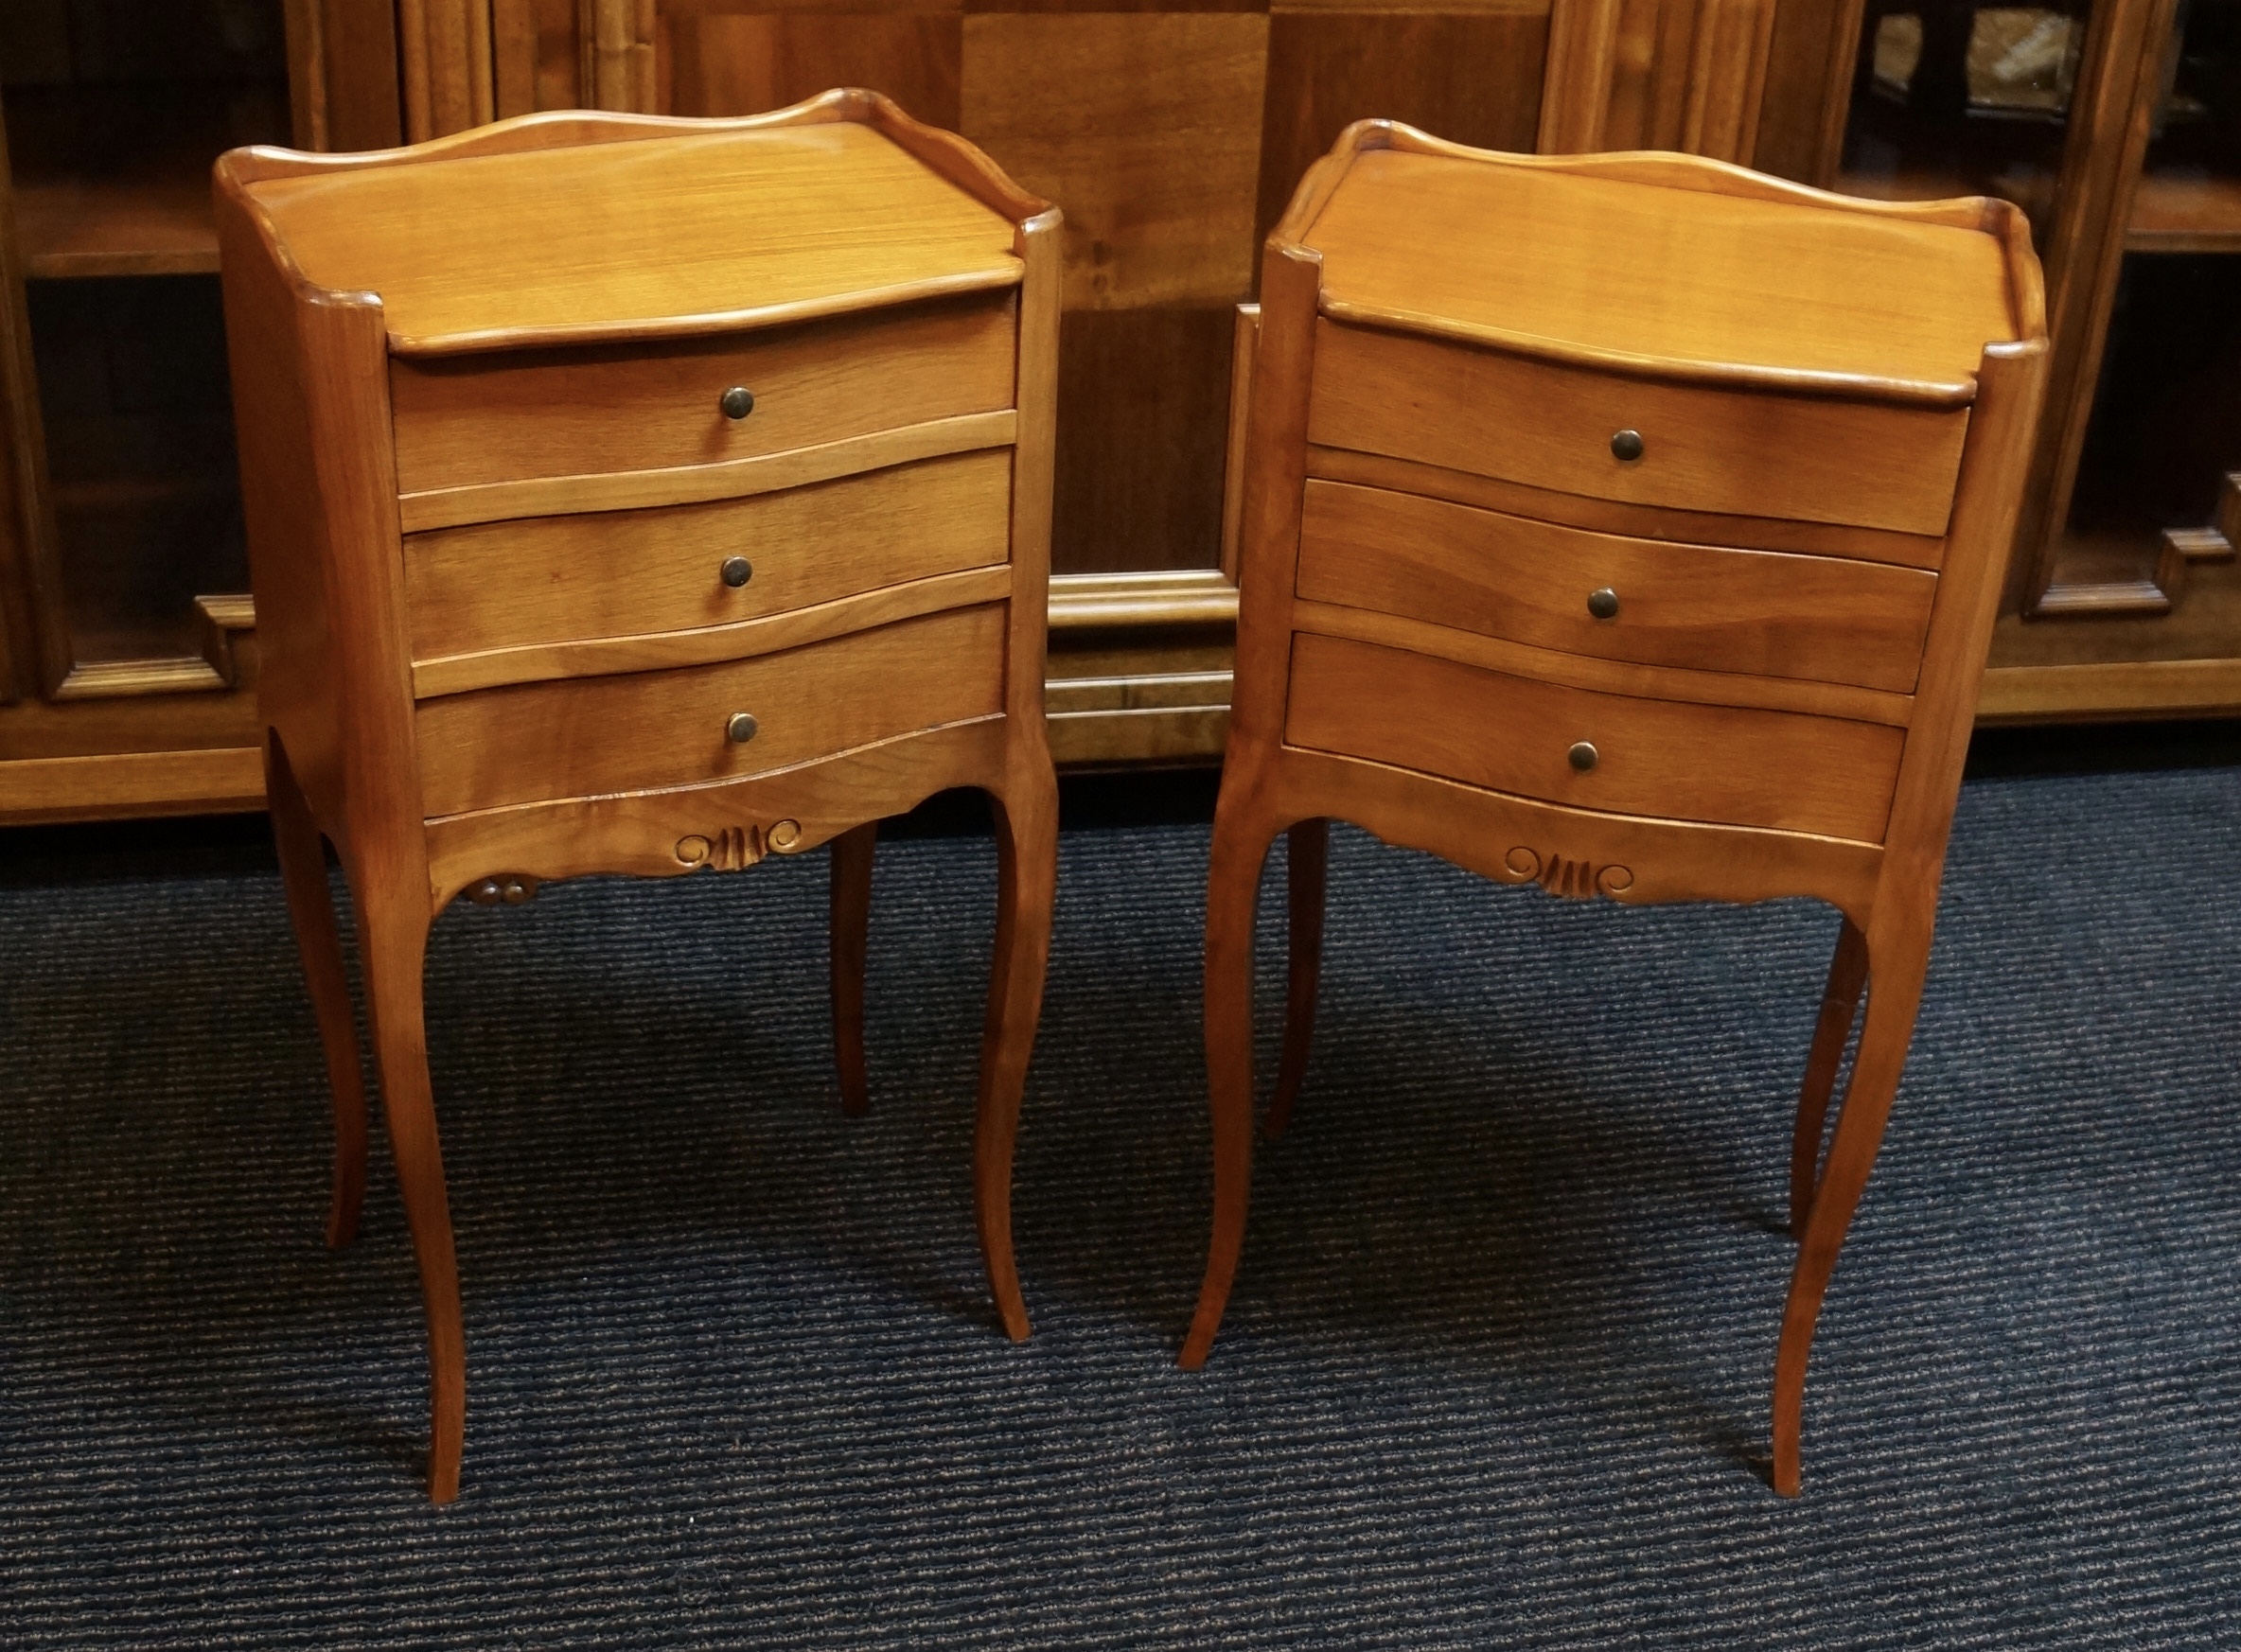 Pair Of Cherrywood Bedside Cabinets Seanic Antiques